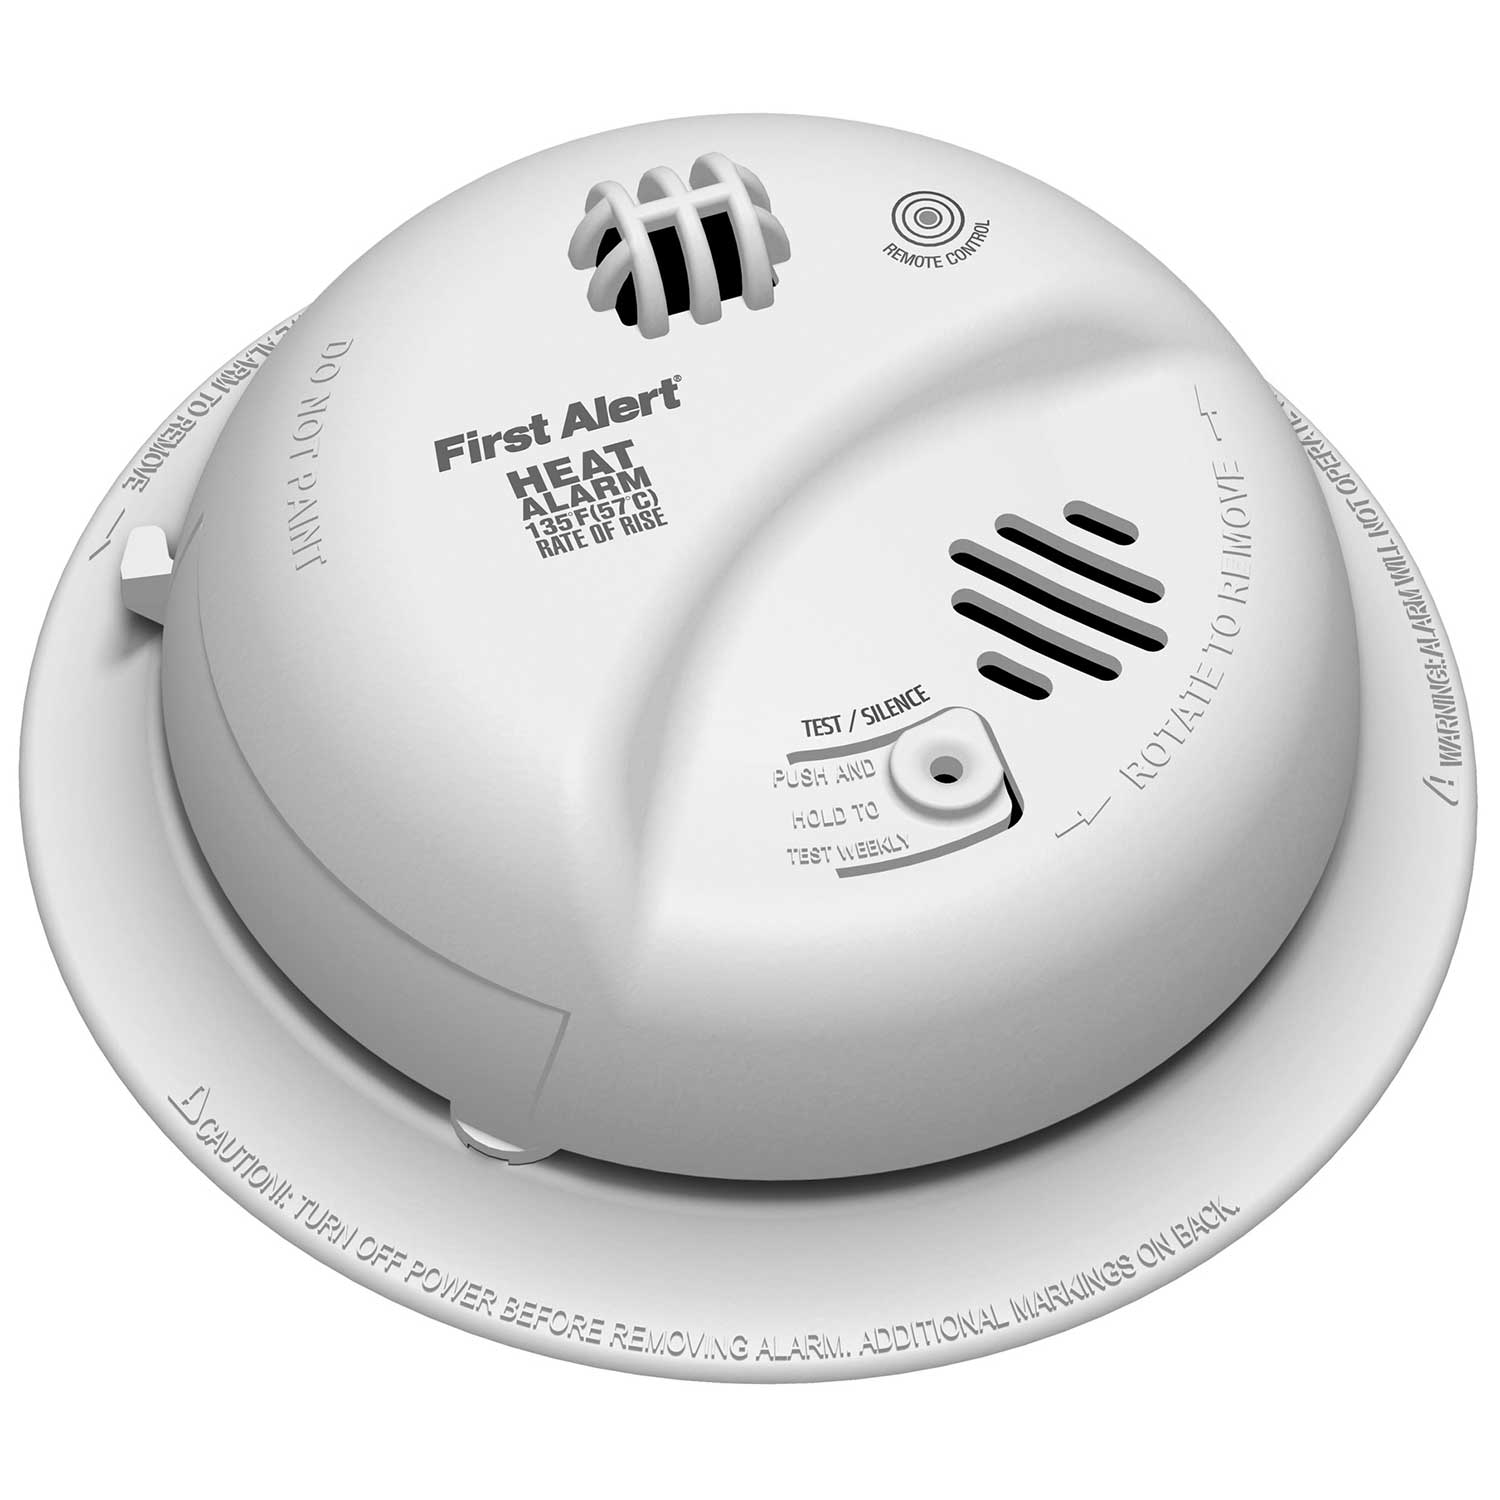 First Alert BRK Brands Hardwired 120-Volt AC/DC Heat Alarm with Battery Backup - HD6135FB